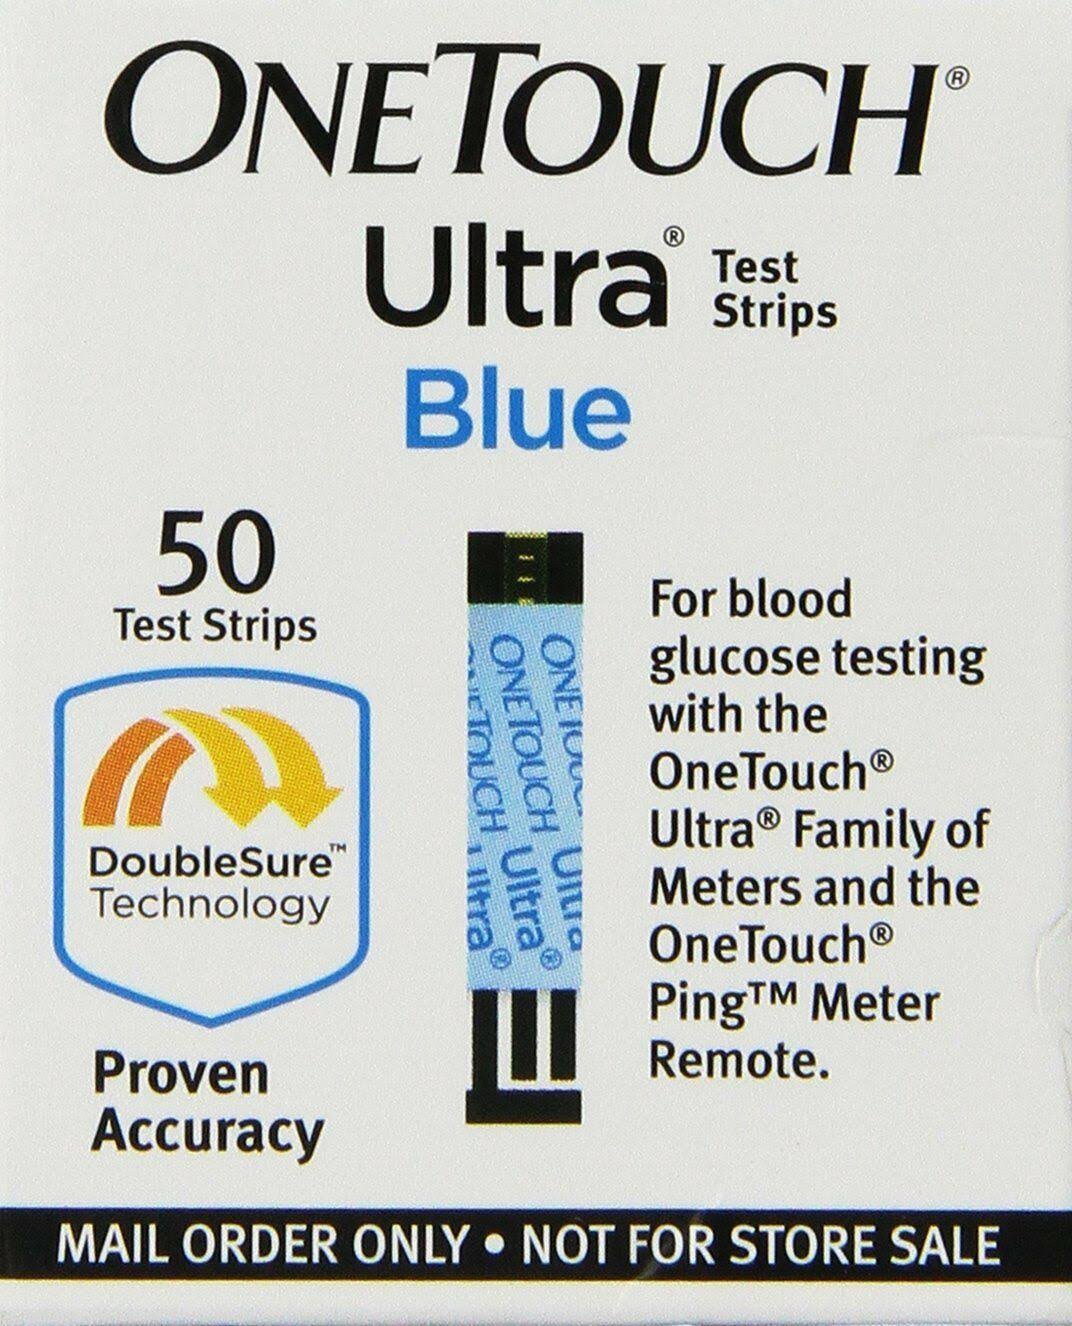 One Touch Ultra Blue Test Strips - 50ct